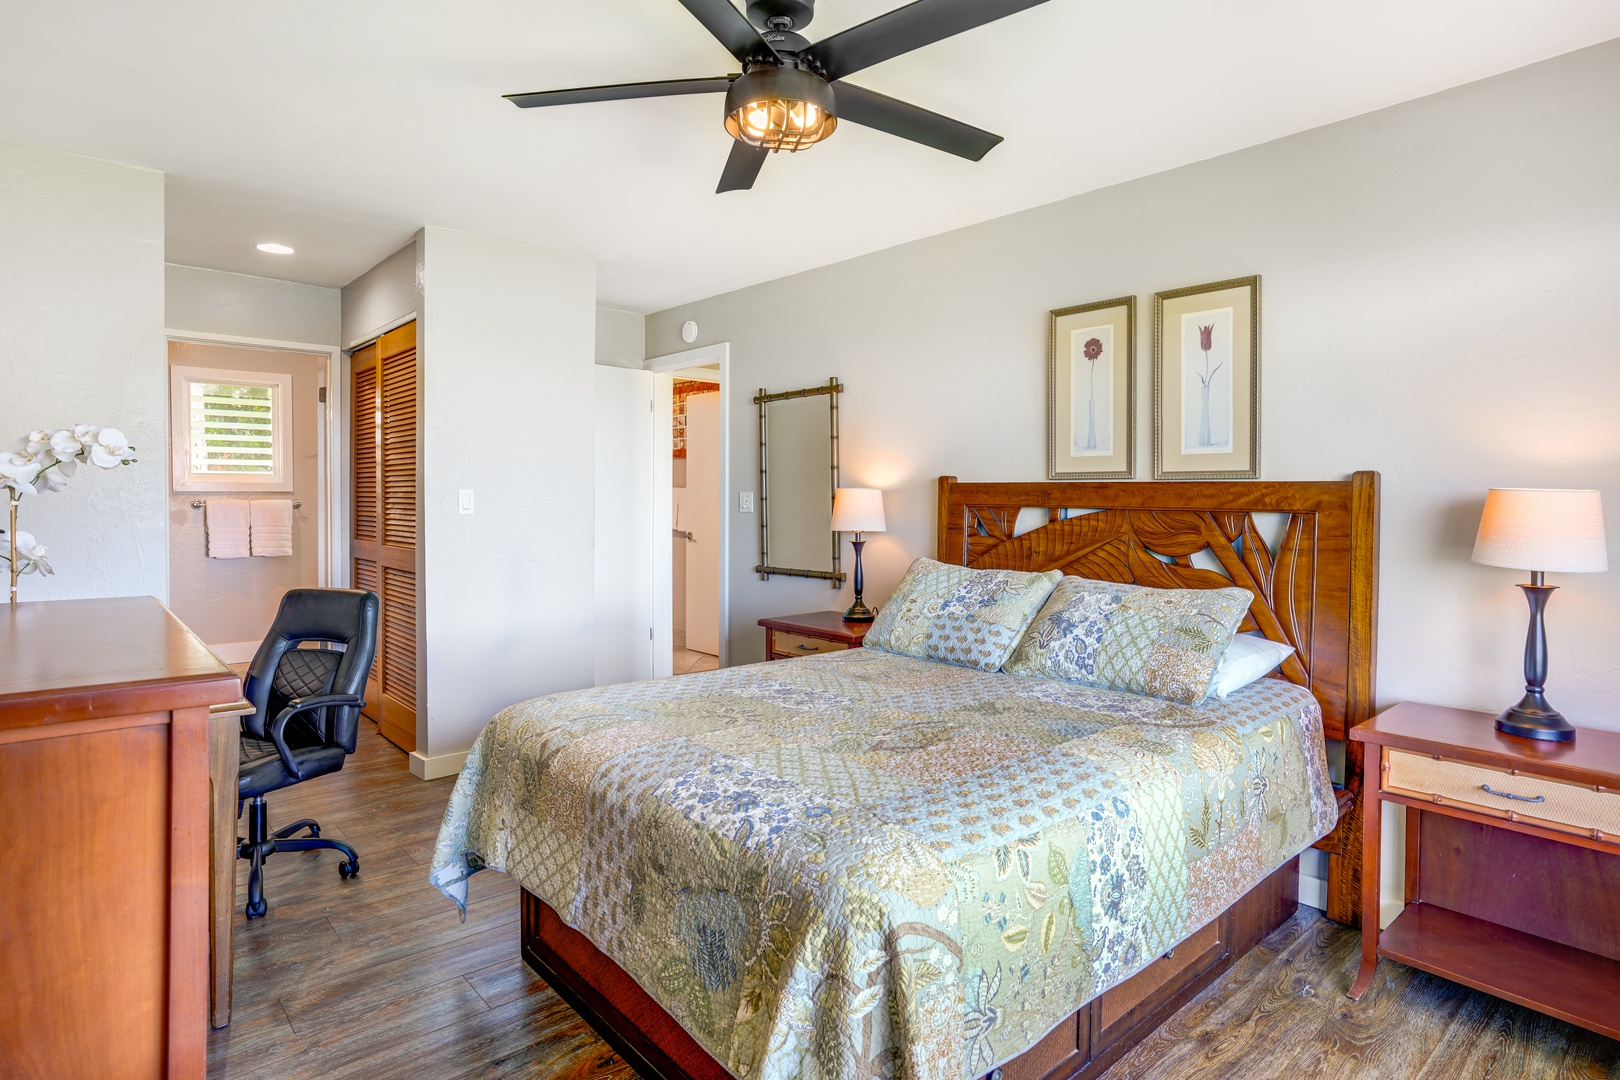 Princeville Vacation Rentals, Alii Kai 7201 - The primary suite, where a sanctuary awaits, complete with a comfortable California king bed, natural lighting and a dedicated home office.